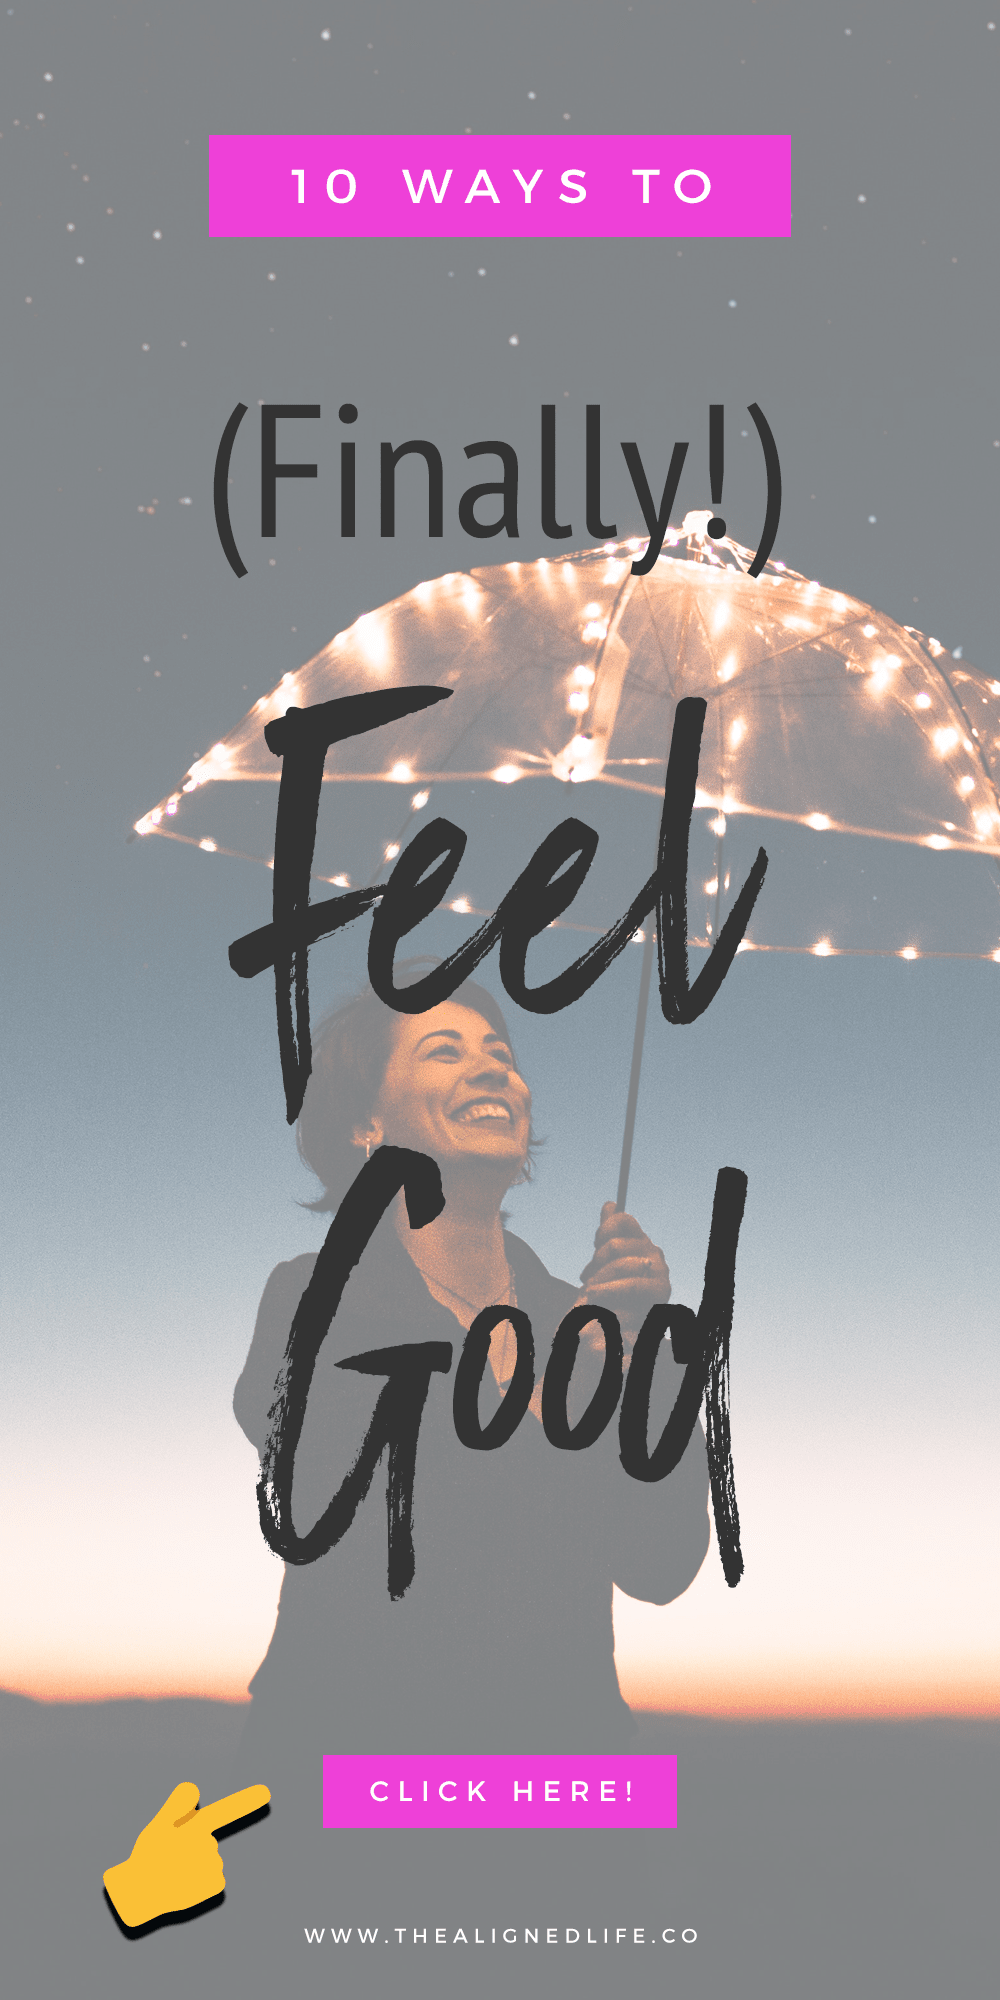 How To (Finally!) Feel Good